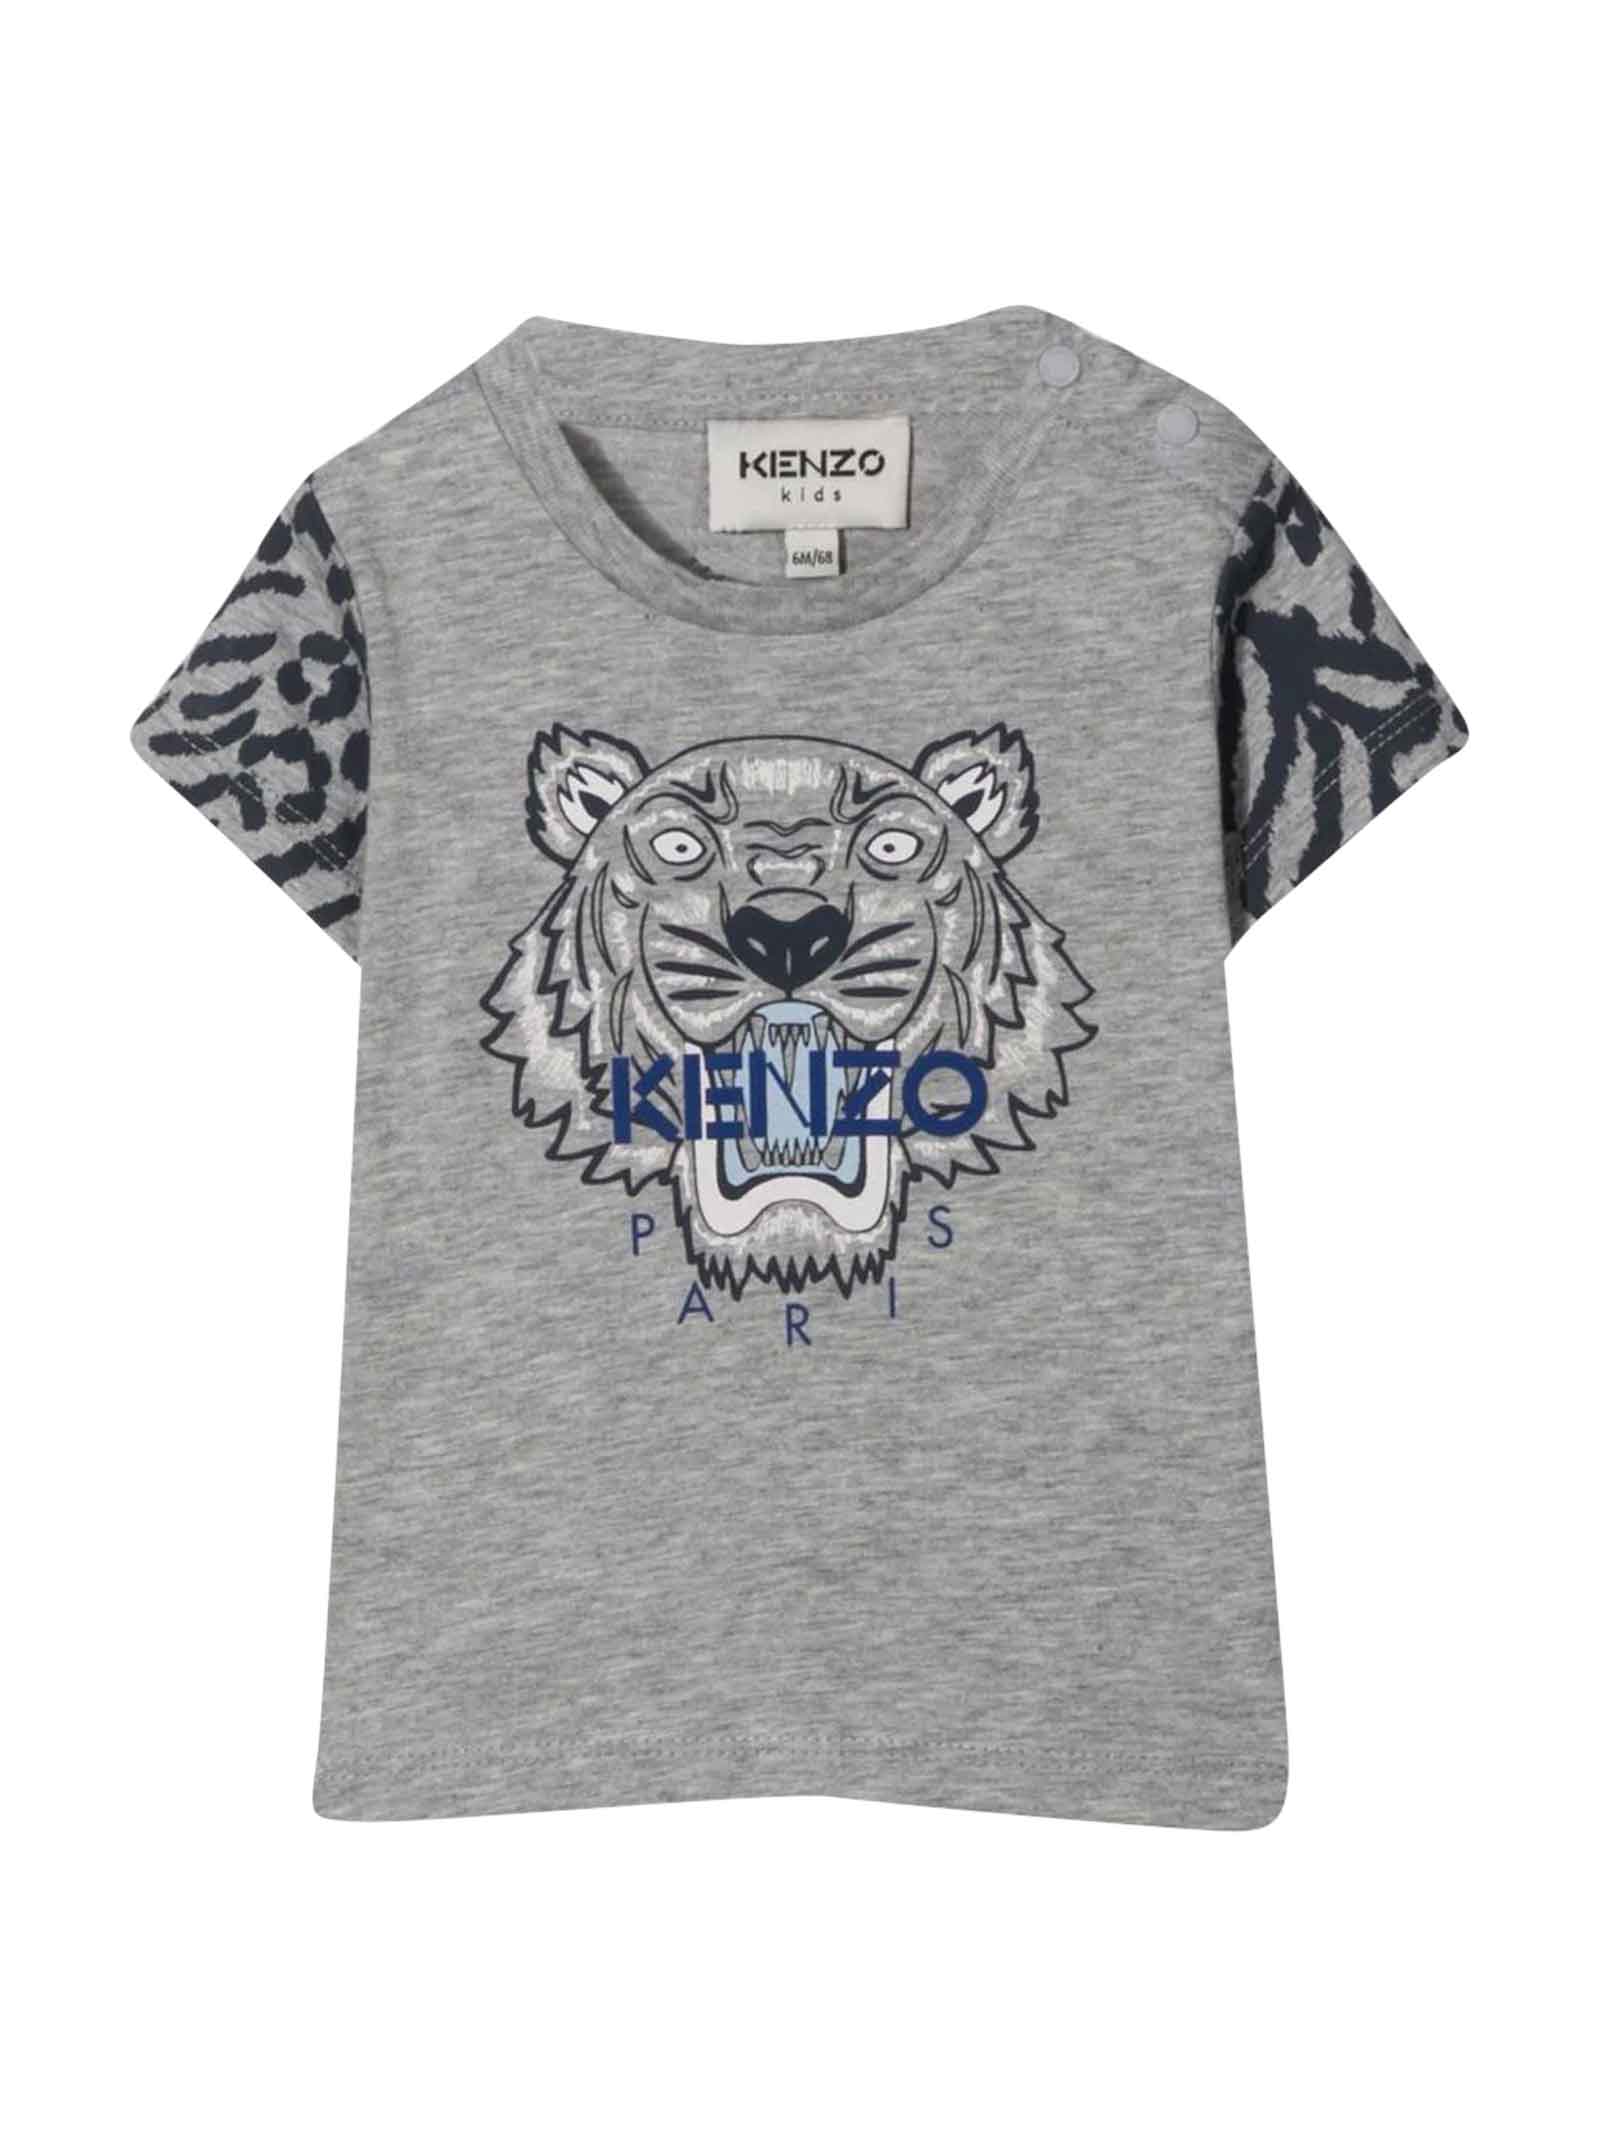 Kenzo Kids Grey Newborn T-shirt With Front Tiger Embroidery Buttoning On The Shoulder Short Sleeve By